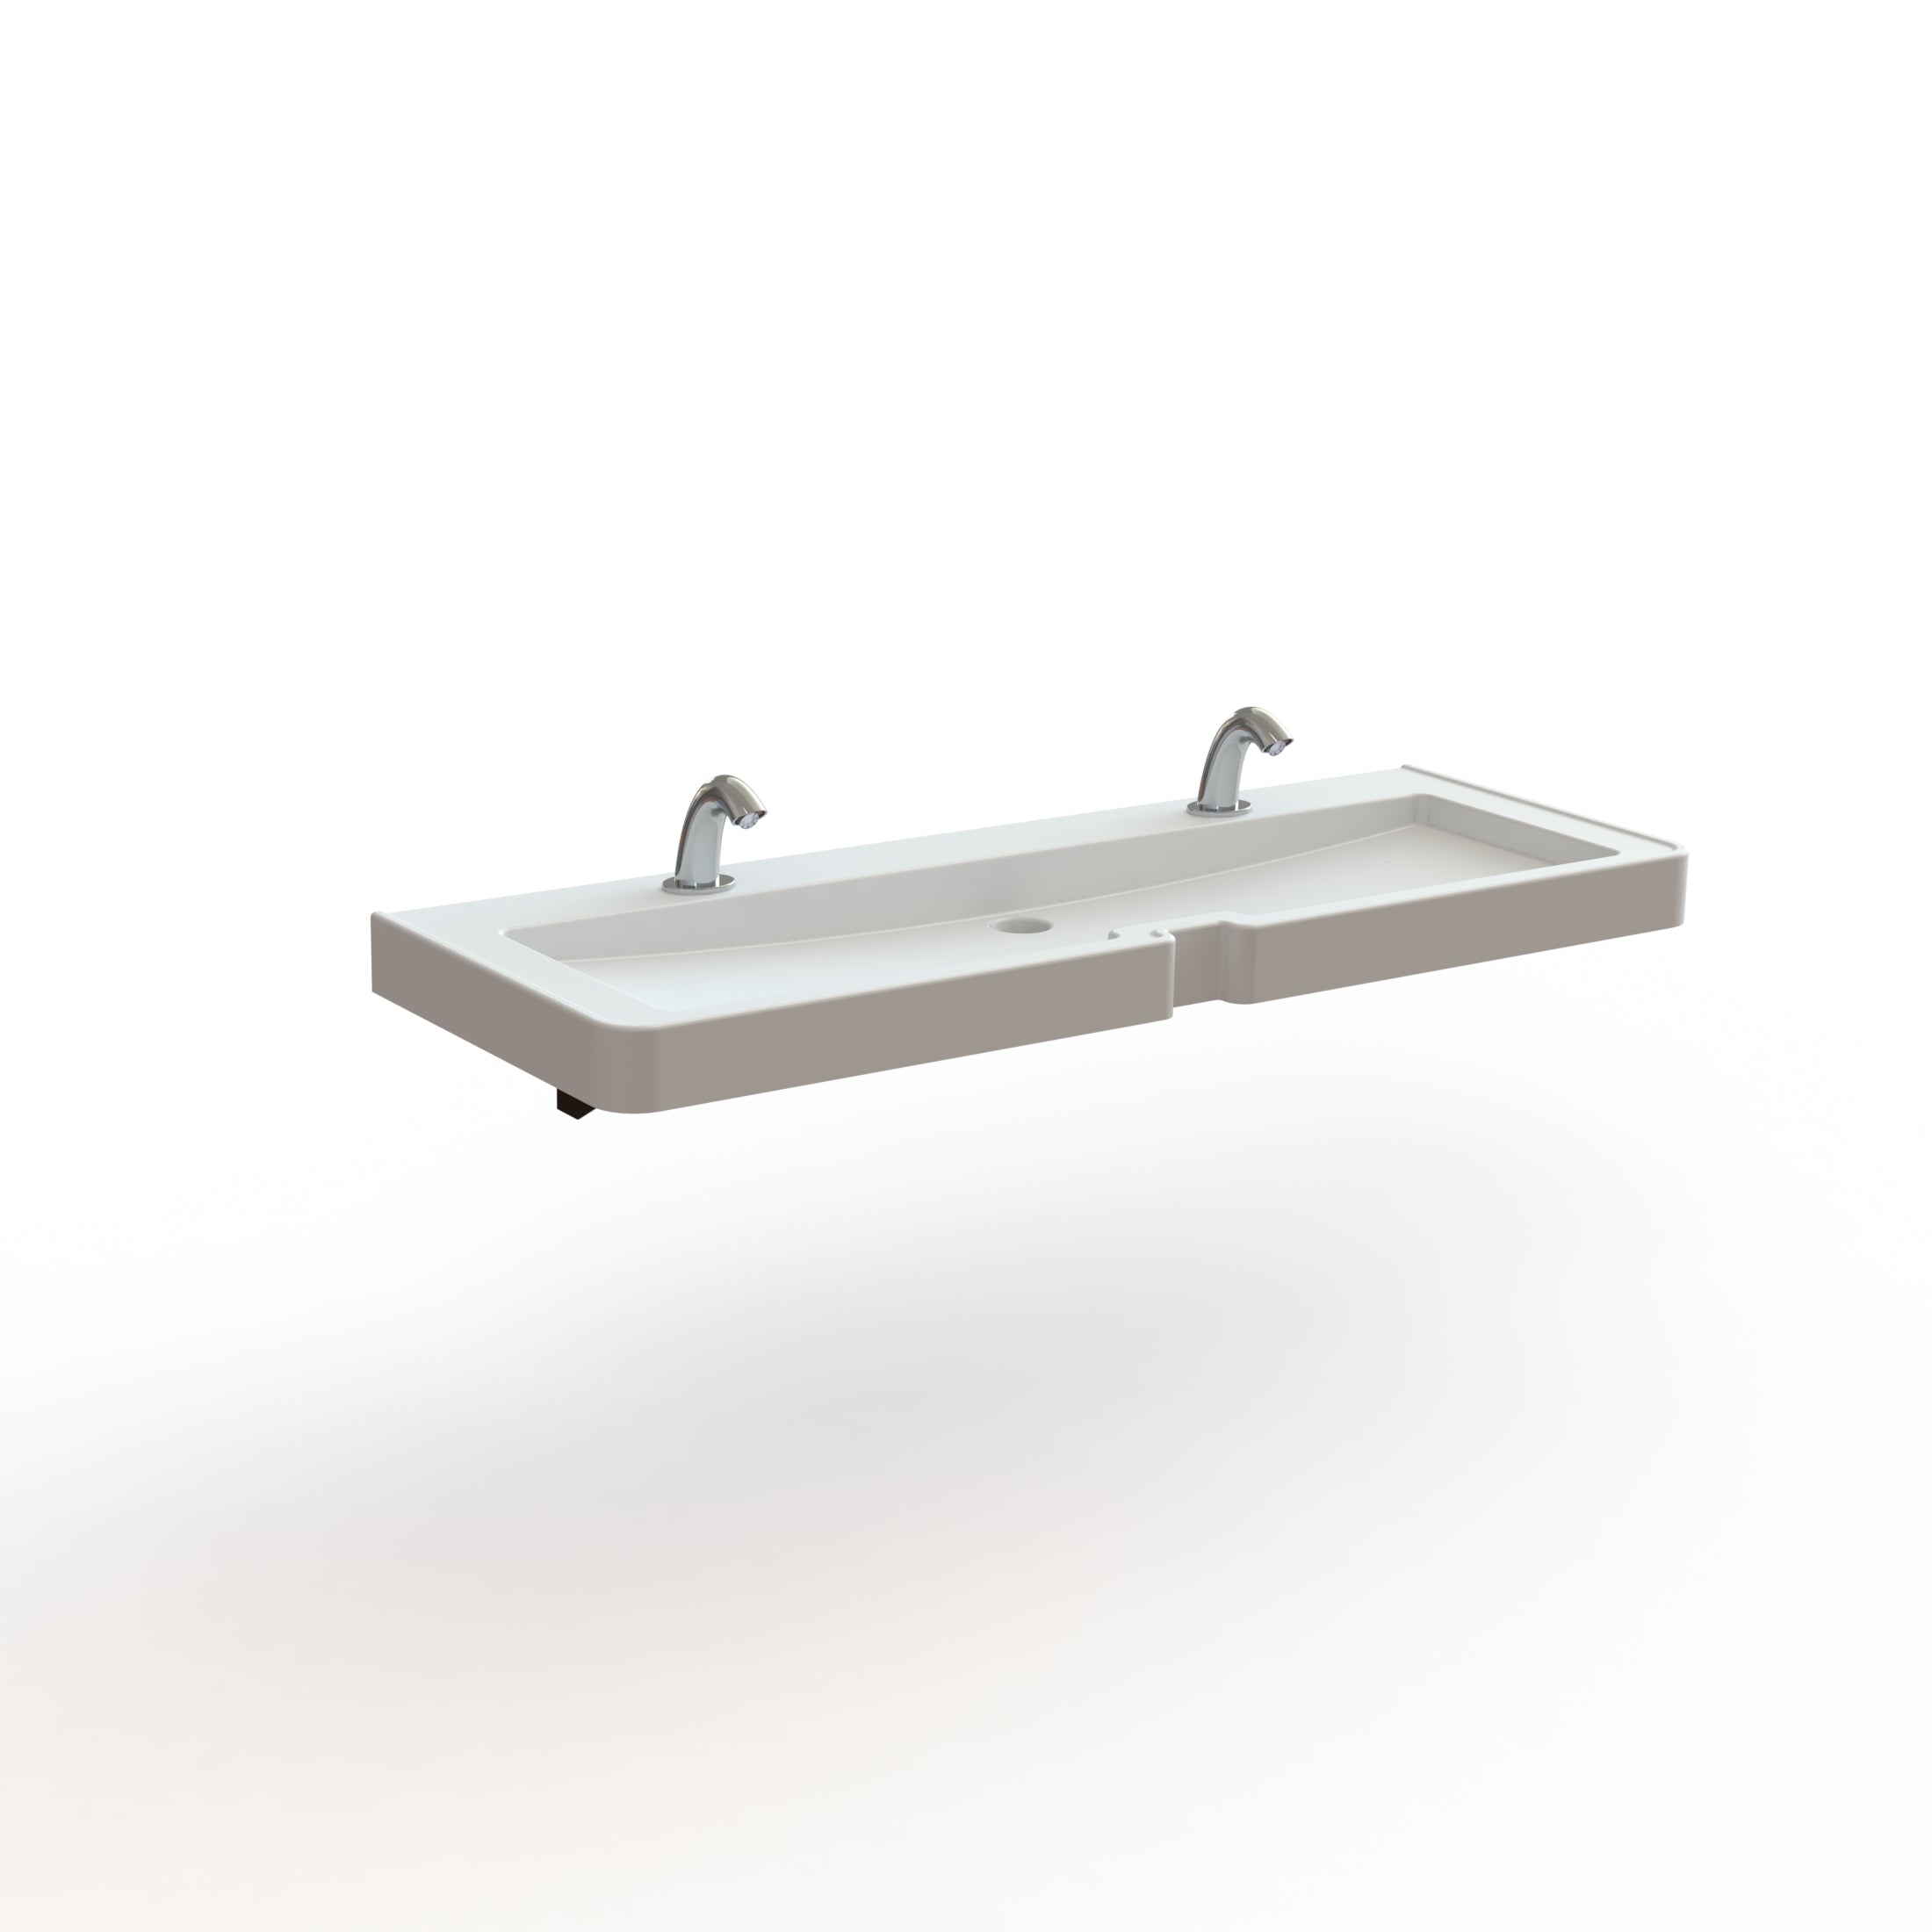 SL02 - Streamlav Legacy Two User Solid Surface Lavatory System for Public Restrooms